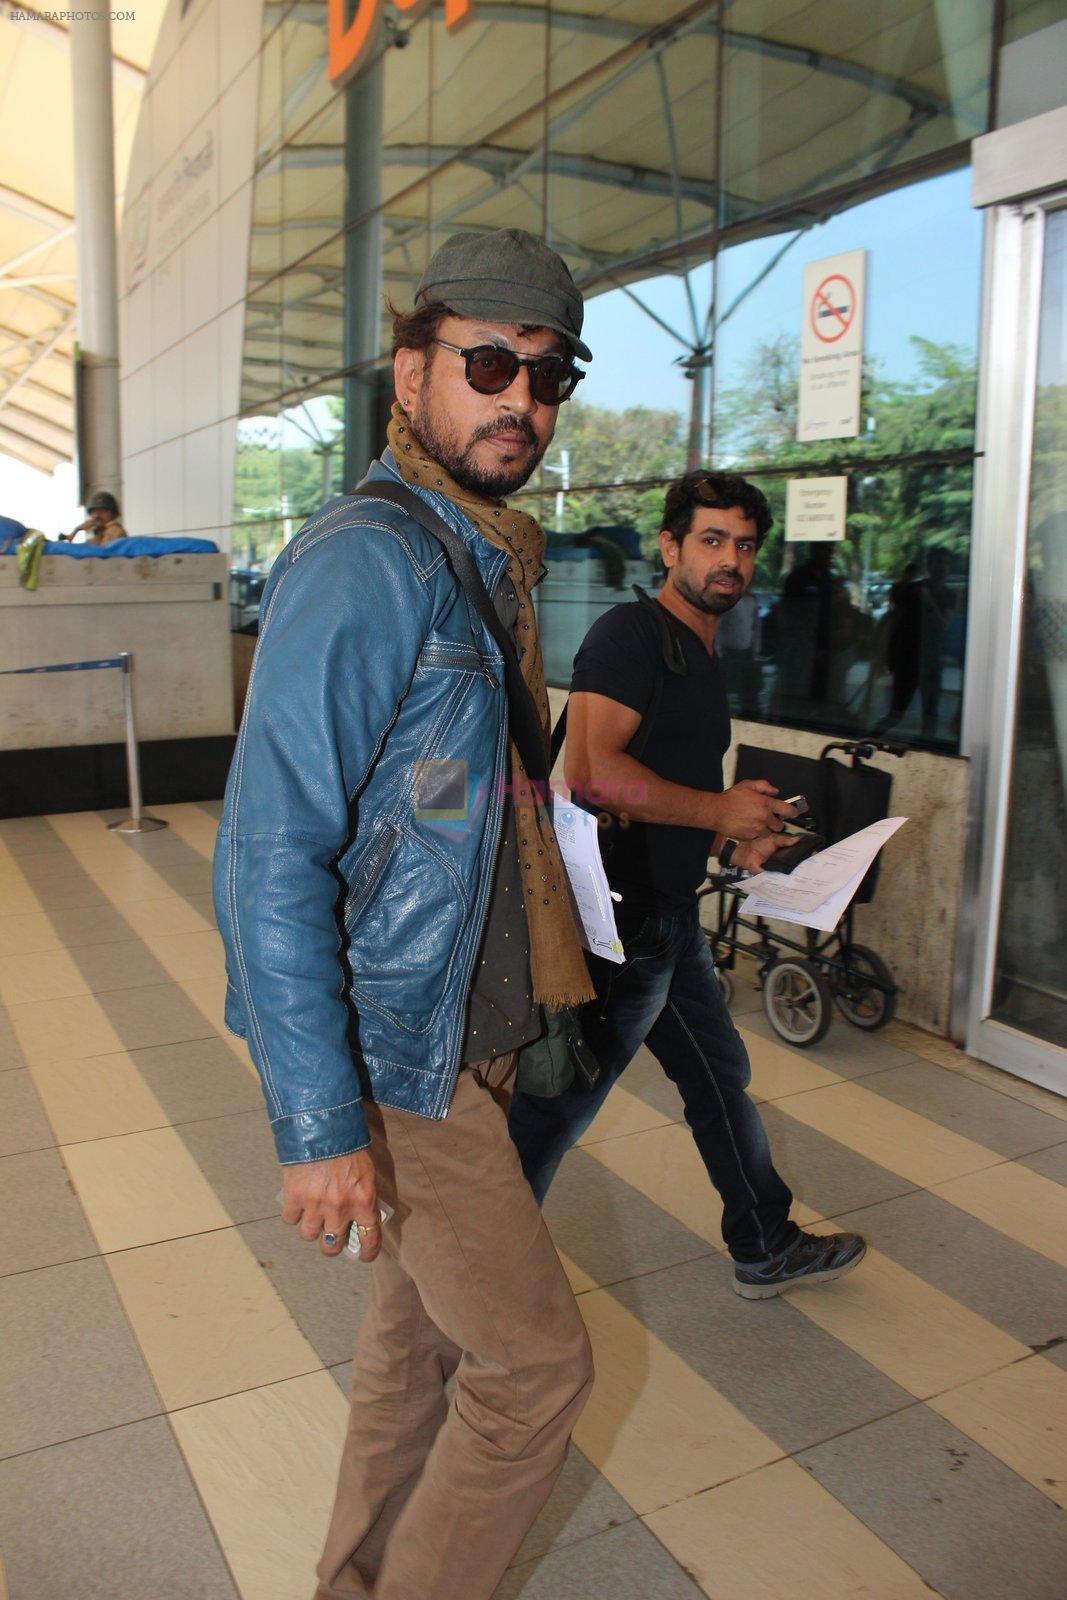 Irrfan Khan snapped at airport on 2nd Feb 2016